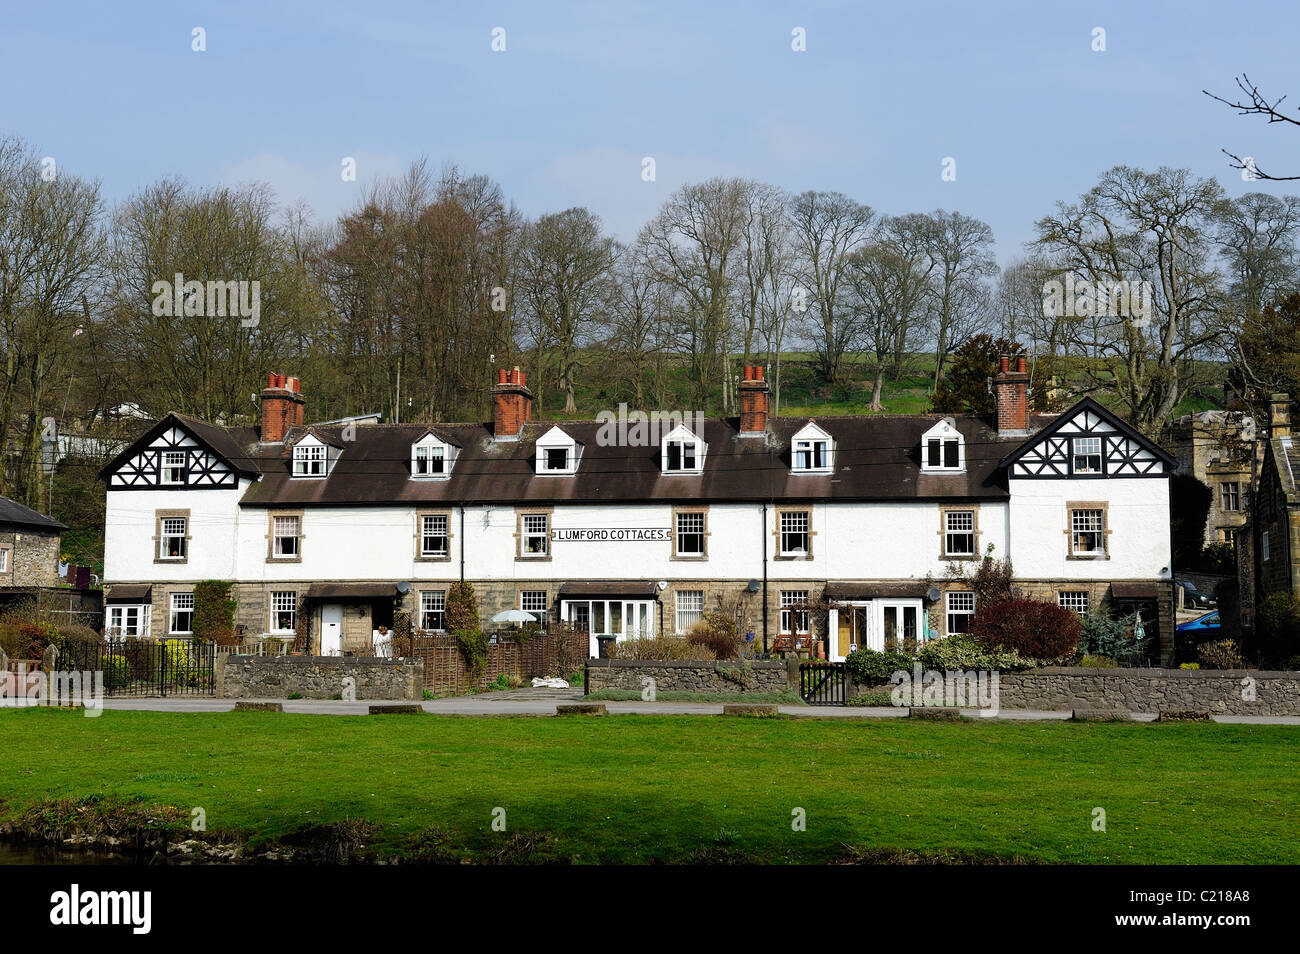 Lumford cottages bakewell derbyshire, Angleterre, Royaume-Uni Banque D'Images